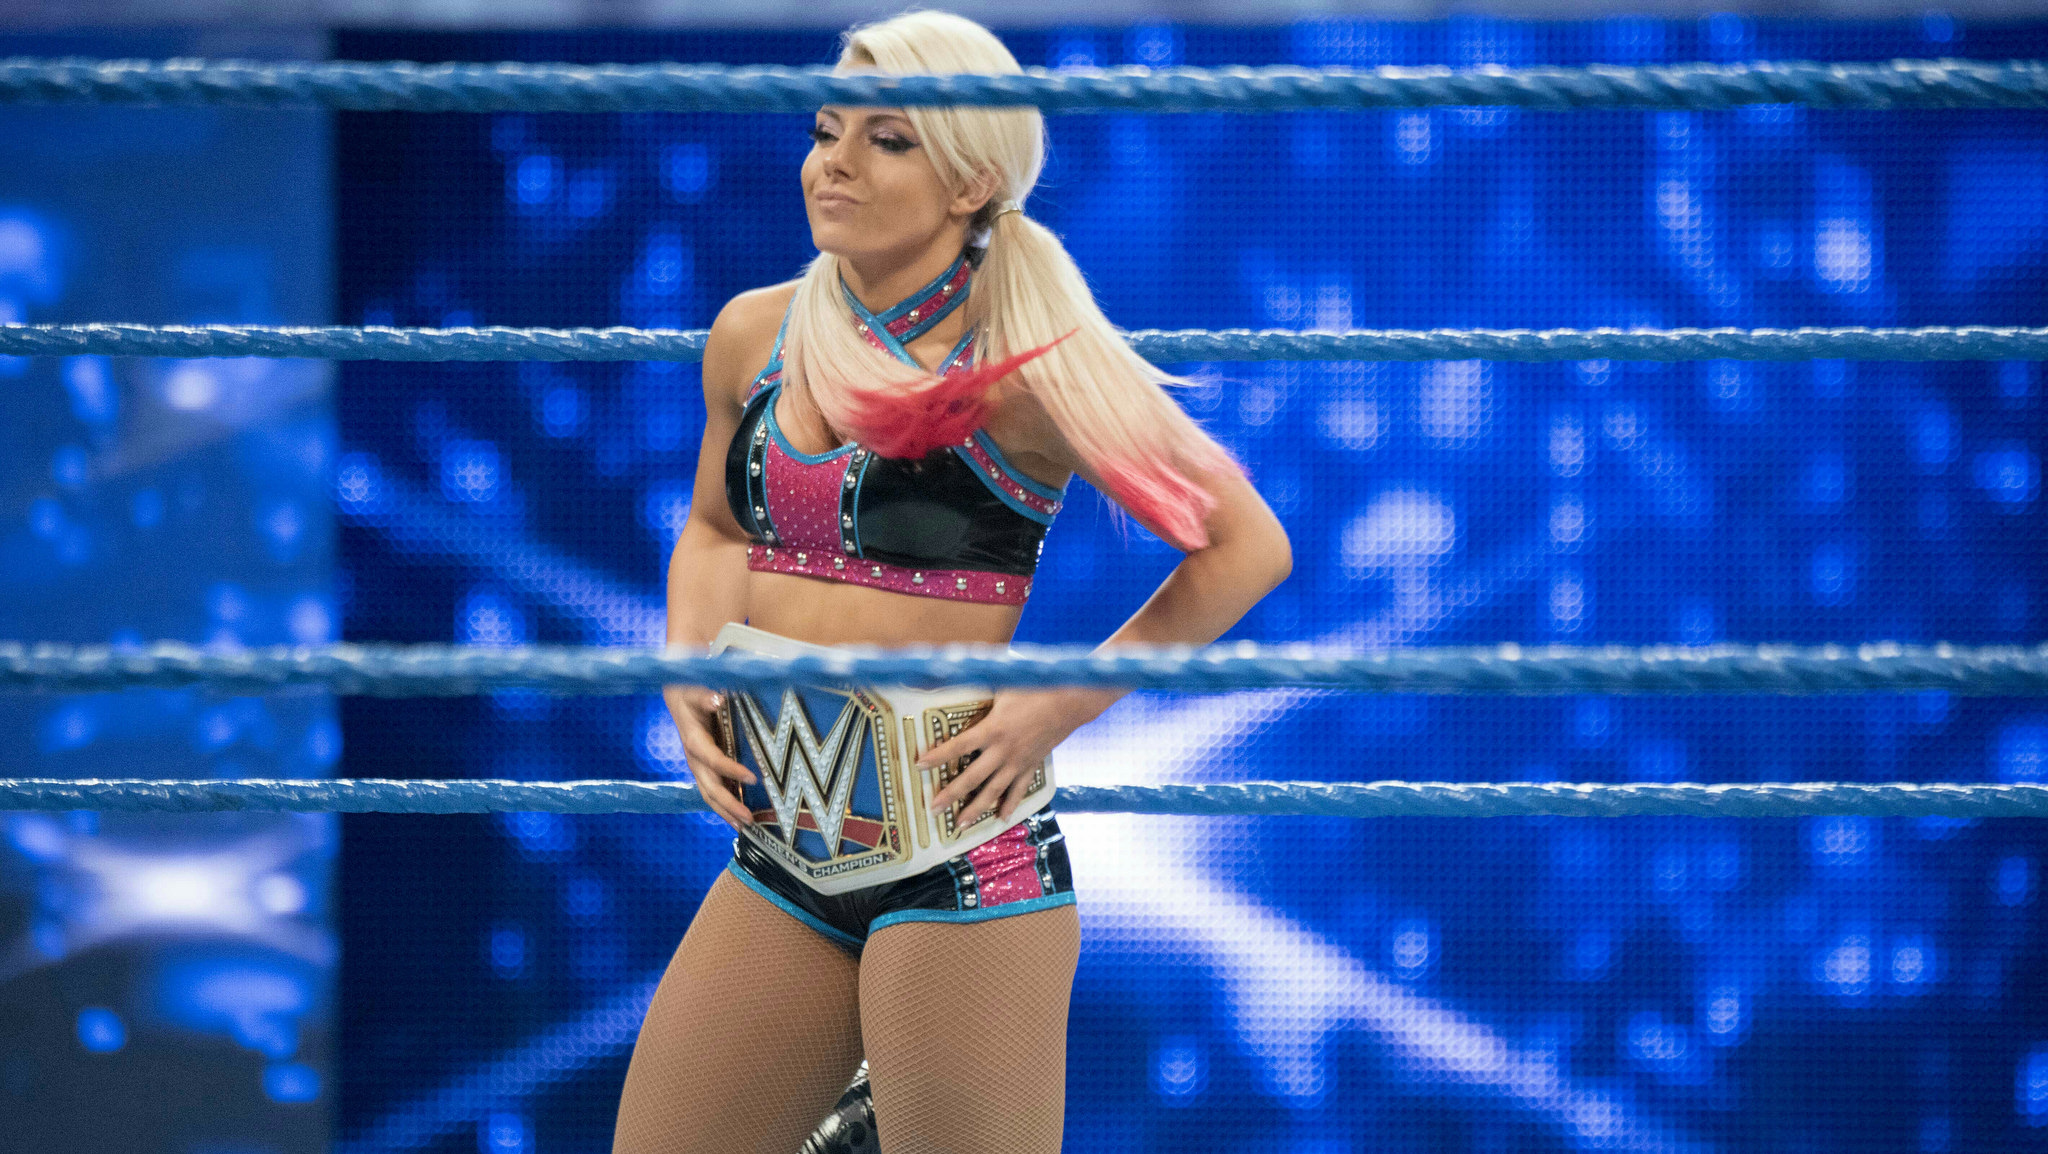 The Top 25 Female Superstars